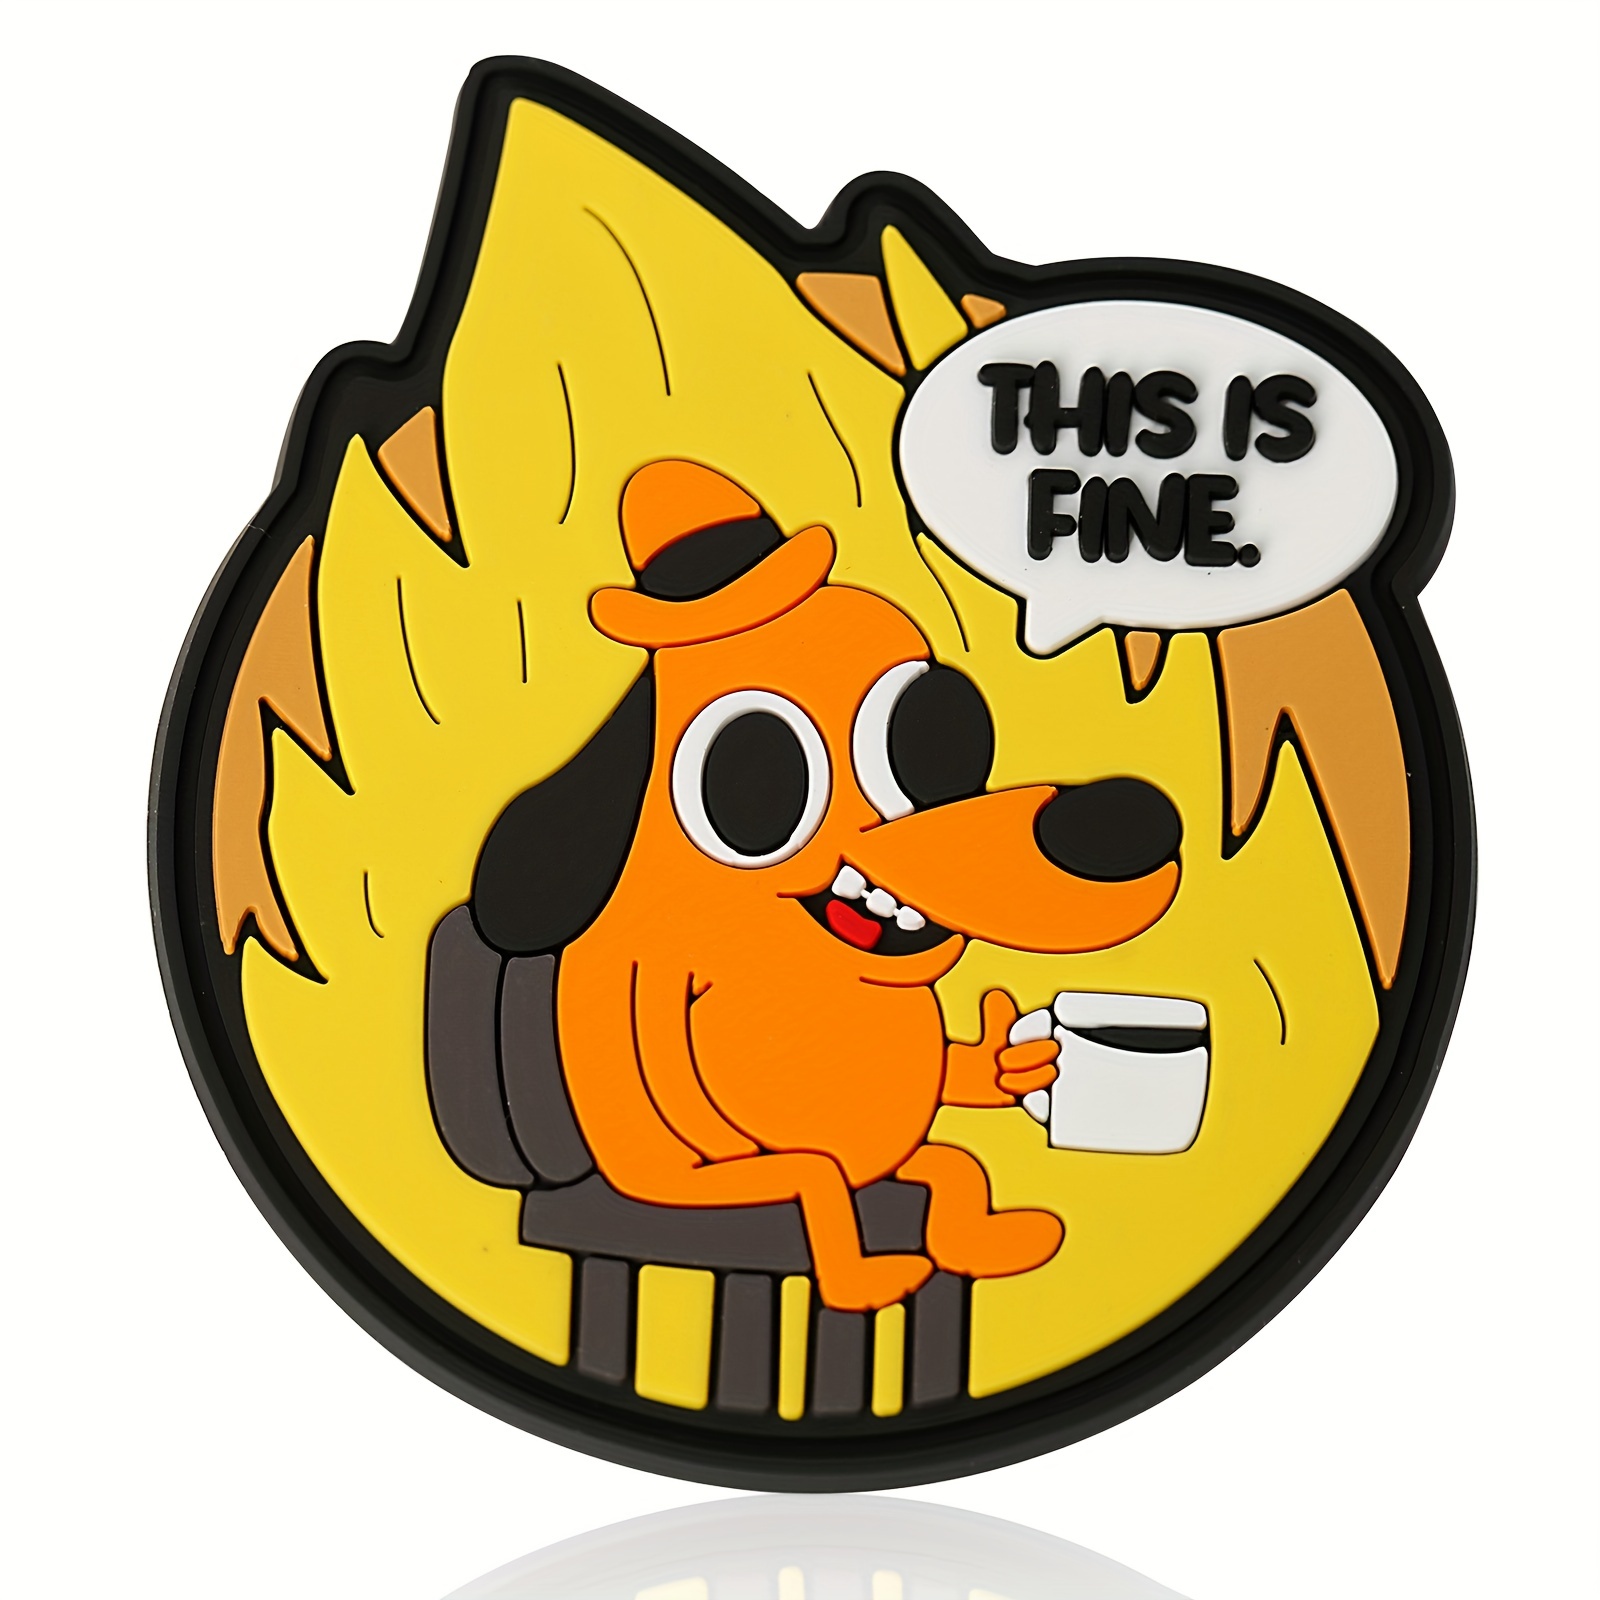 

1pc Fine Dog Pvc Patch, Pvc Rubber Meme With Hook And Loop Fastener, Funny Tactical Patches For Backpacks, Vests, Jackets, Jeans, Hats